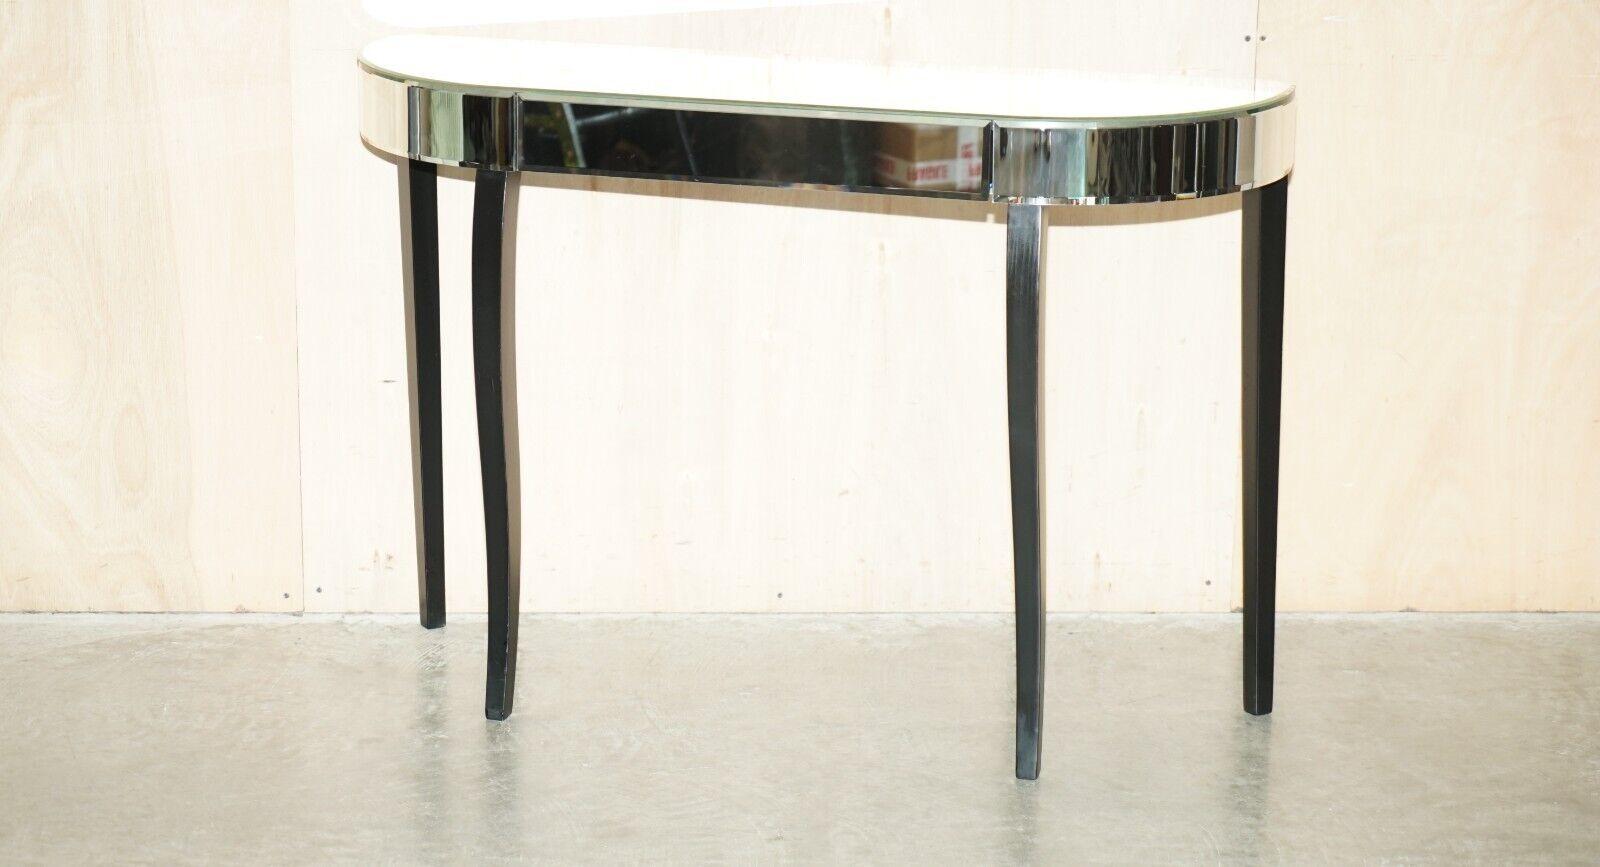 Royal House Antiques

Royal House Antiques is delighted to offer for sale this nice elegant Mirrored console table with one single drawer and long sculpted ebonised legs 

Please note the delivery fee listed is just a guide, it covers within the M25